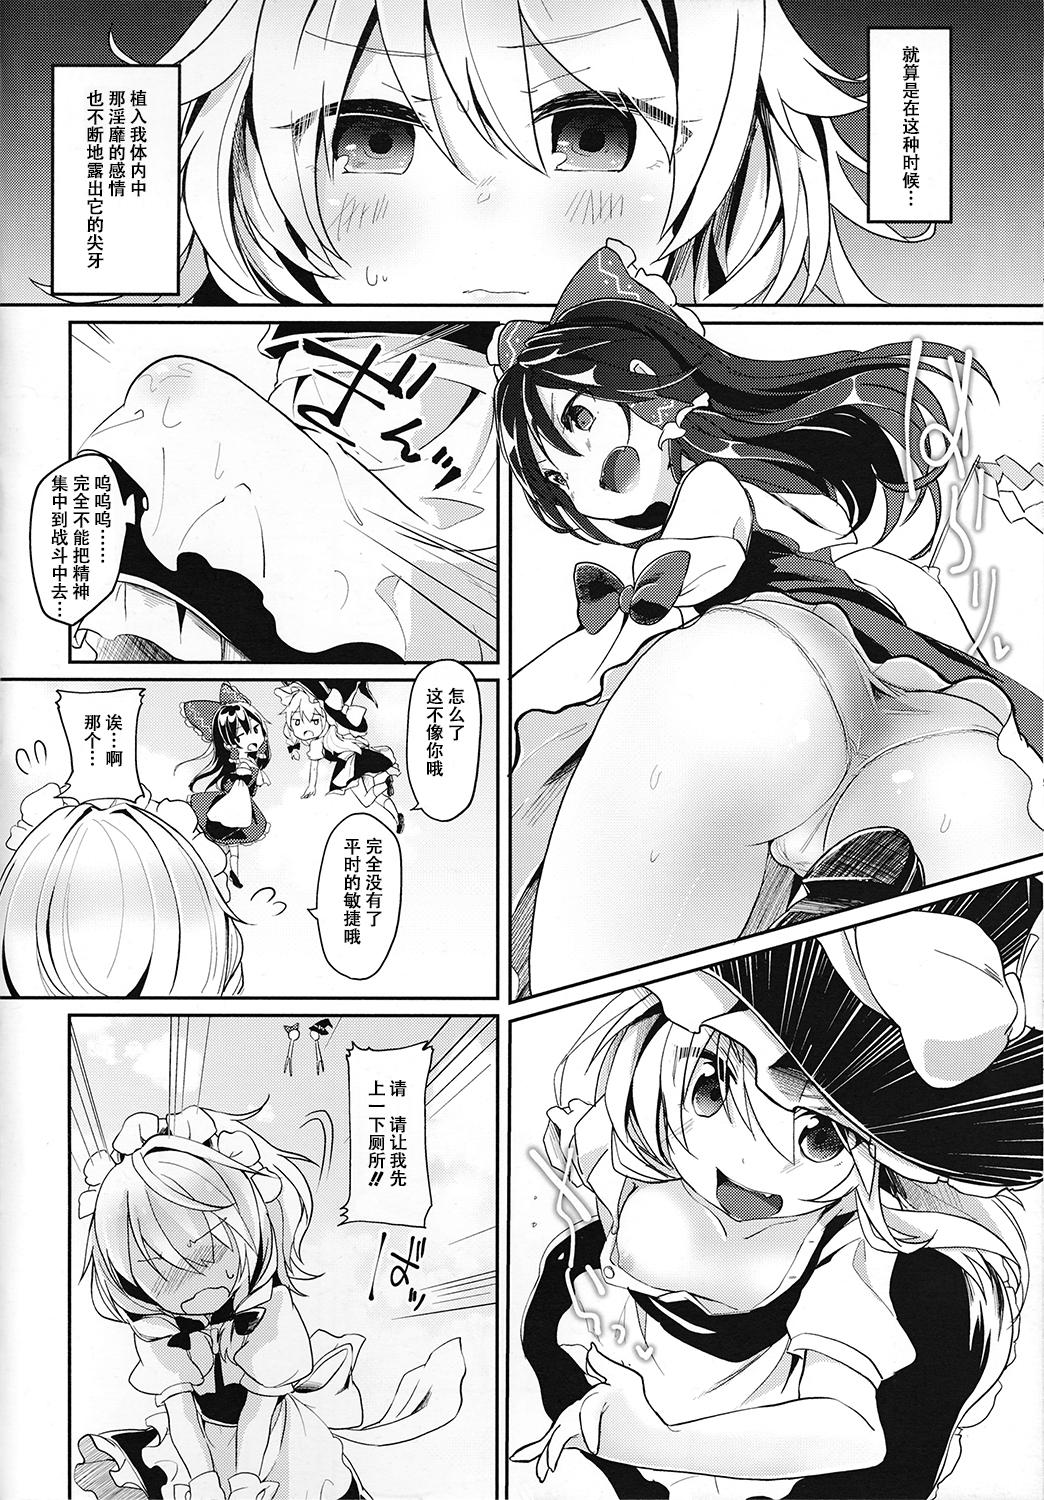 Suck Cock Reverse Enemy - Touhou project Tamil - Page 5